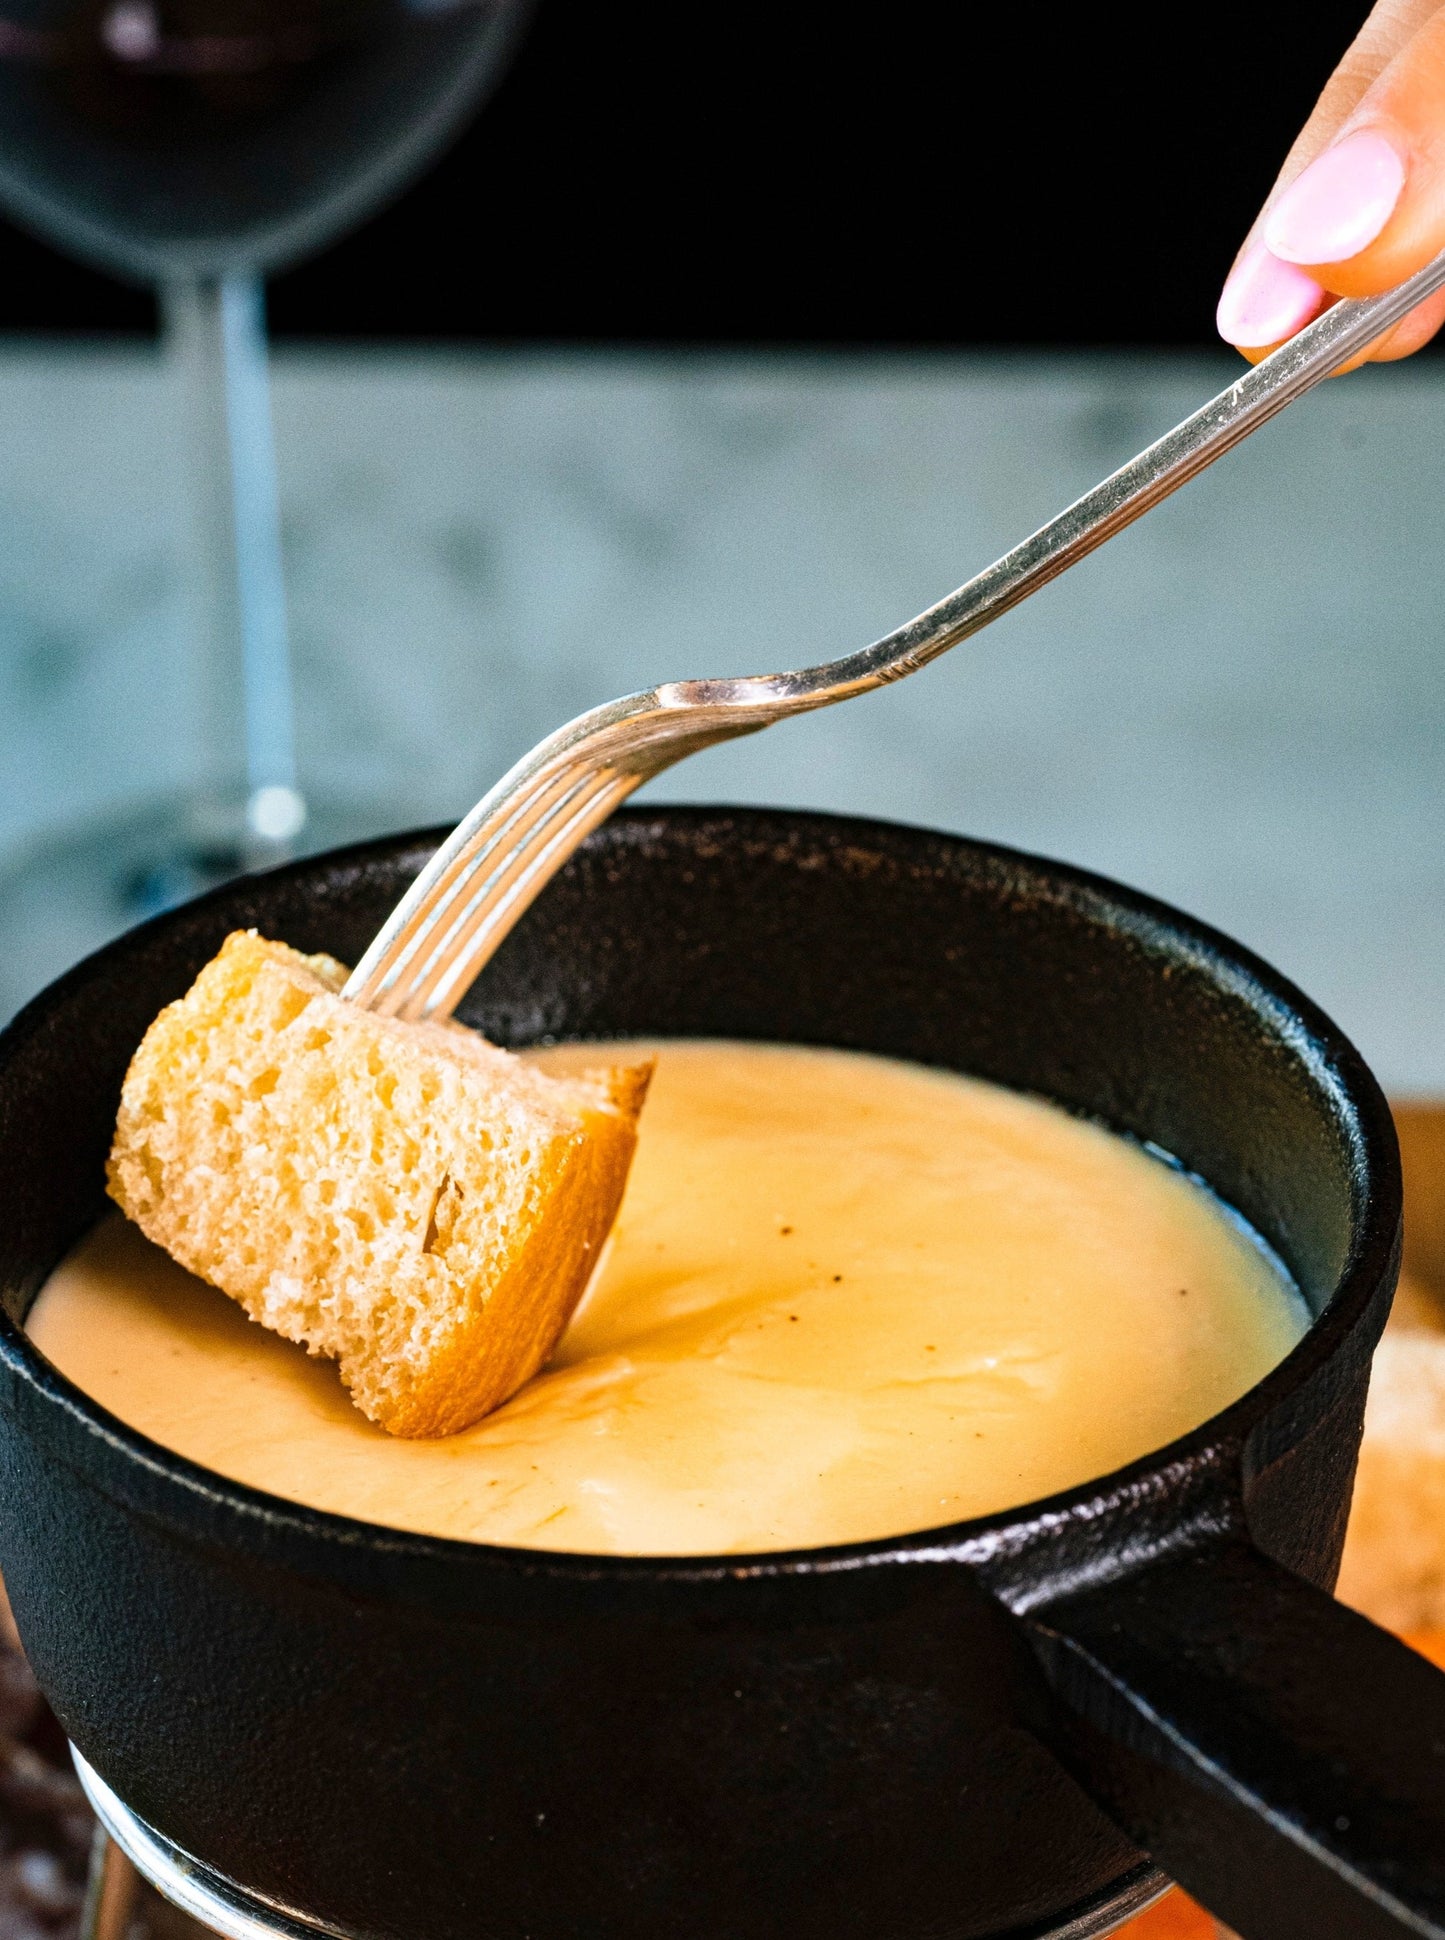 Fondue Night for Two!